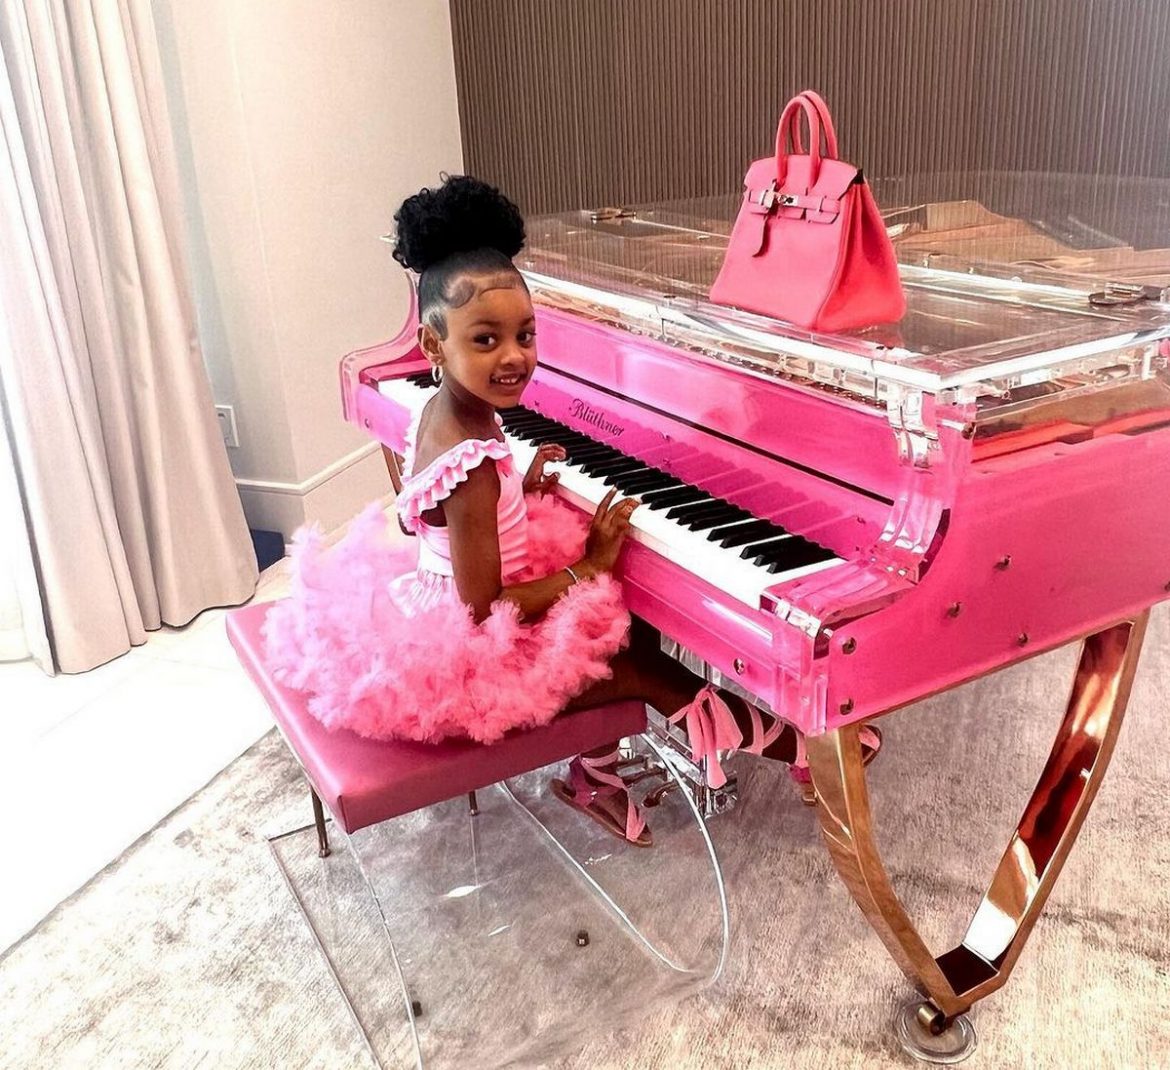 Cardi B & Offset Gift Hermes Bag Worth $25,000 To 5-Year-Old